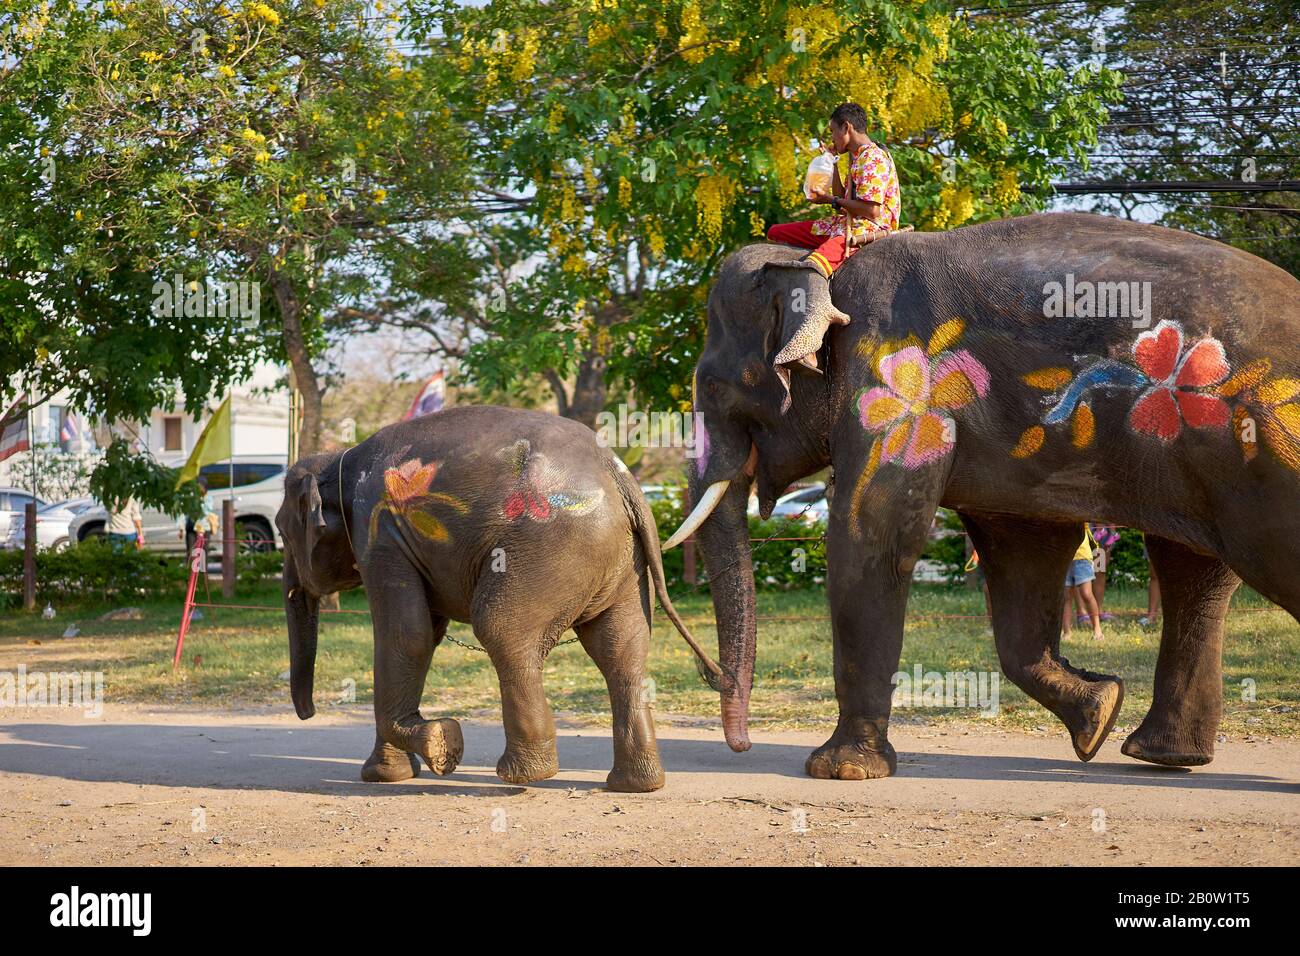 Elephants painted for Songkran holiday, which is New Year in Thailand. Stock Photo